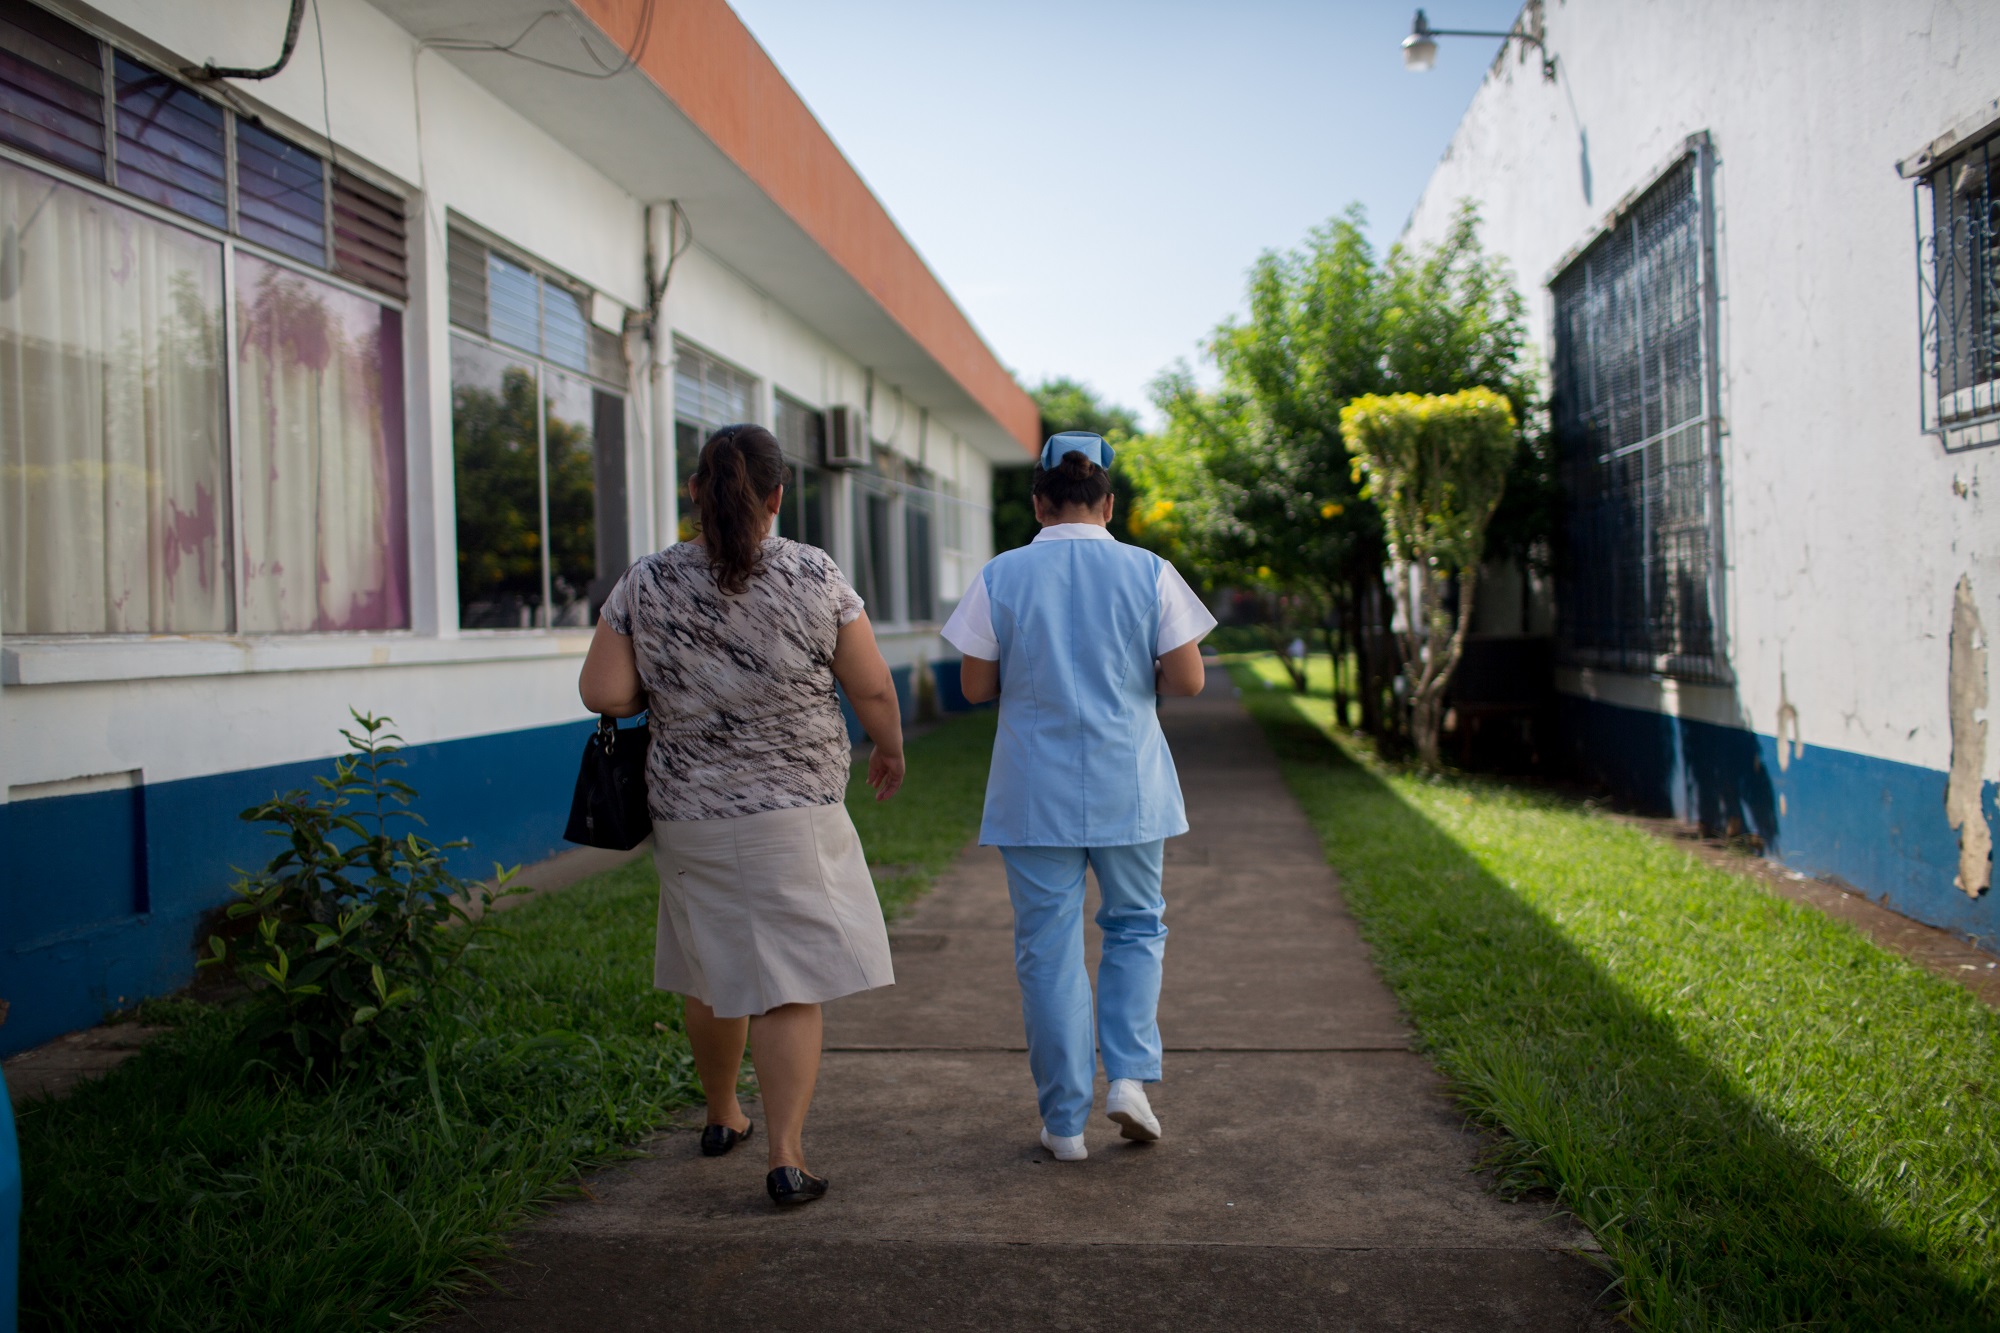 A nurse takes escorts a client to health services in Guatemala. Photo by Anna Watts for IntraHealth International.